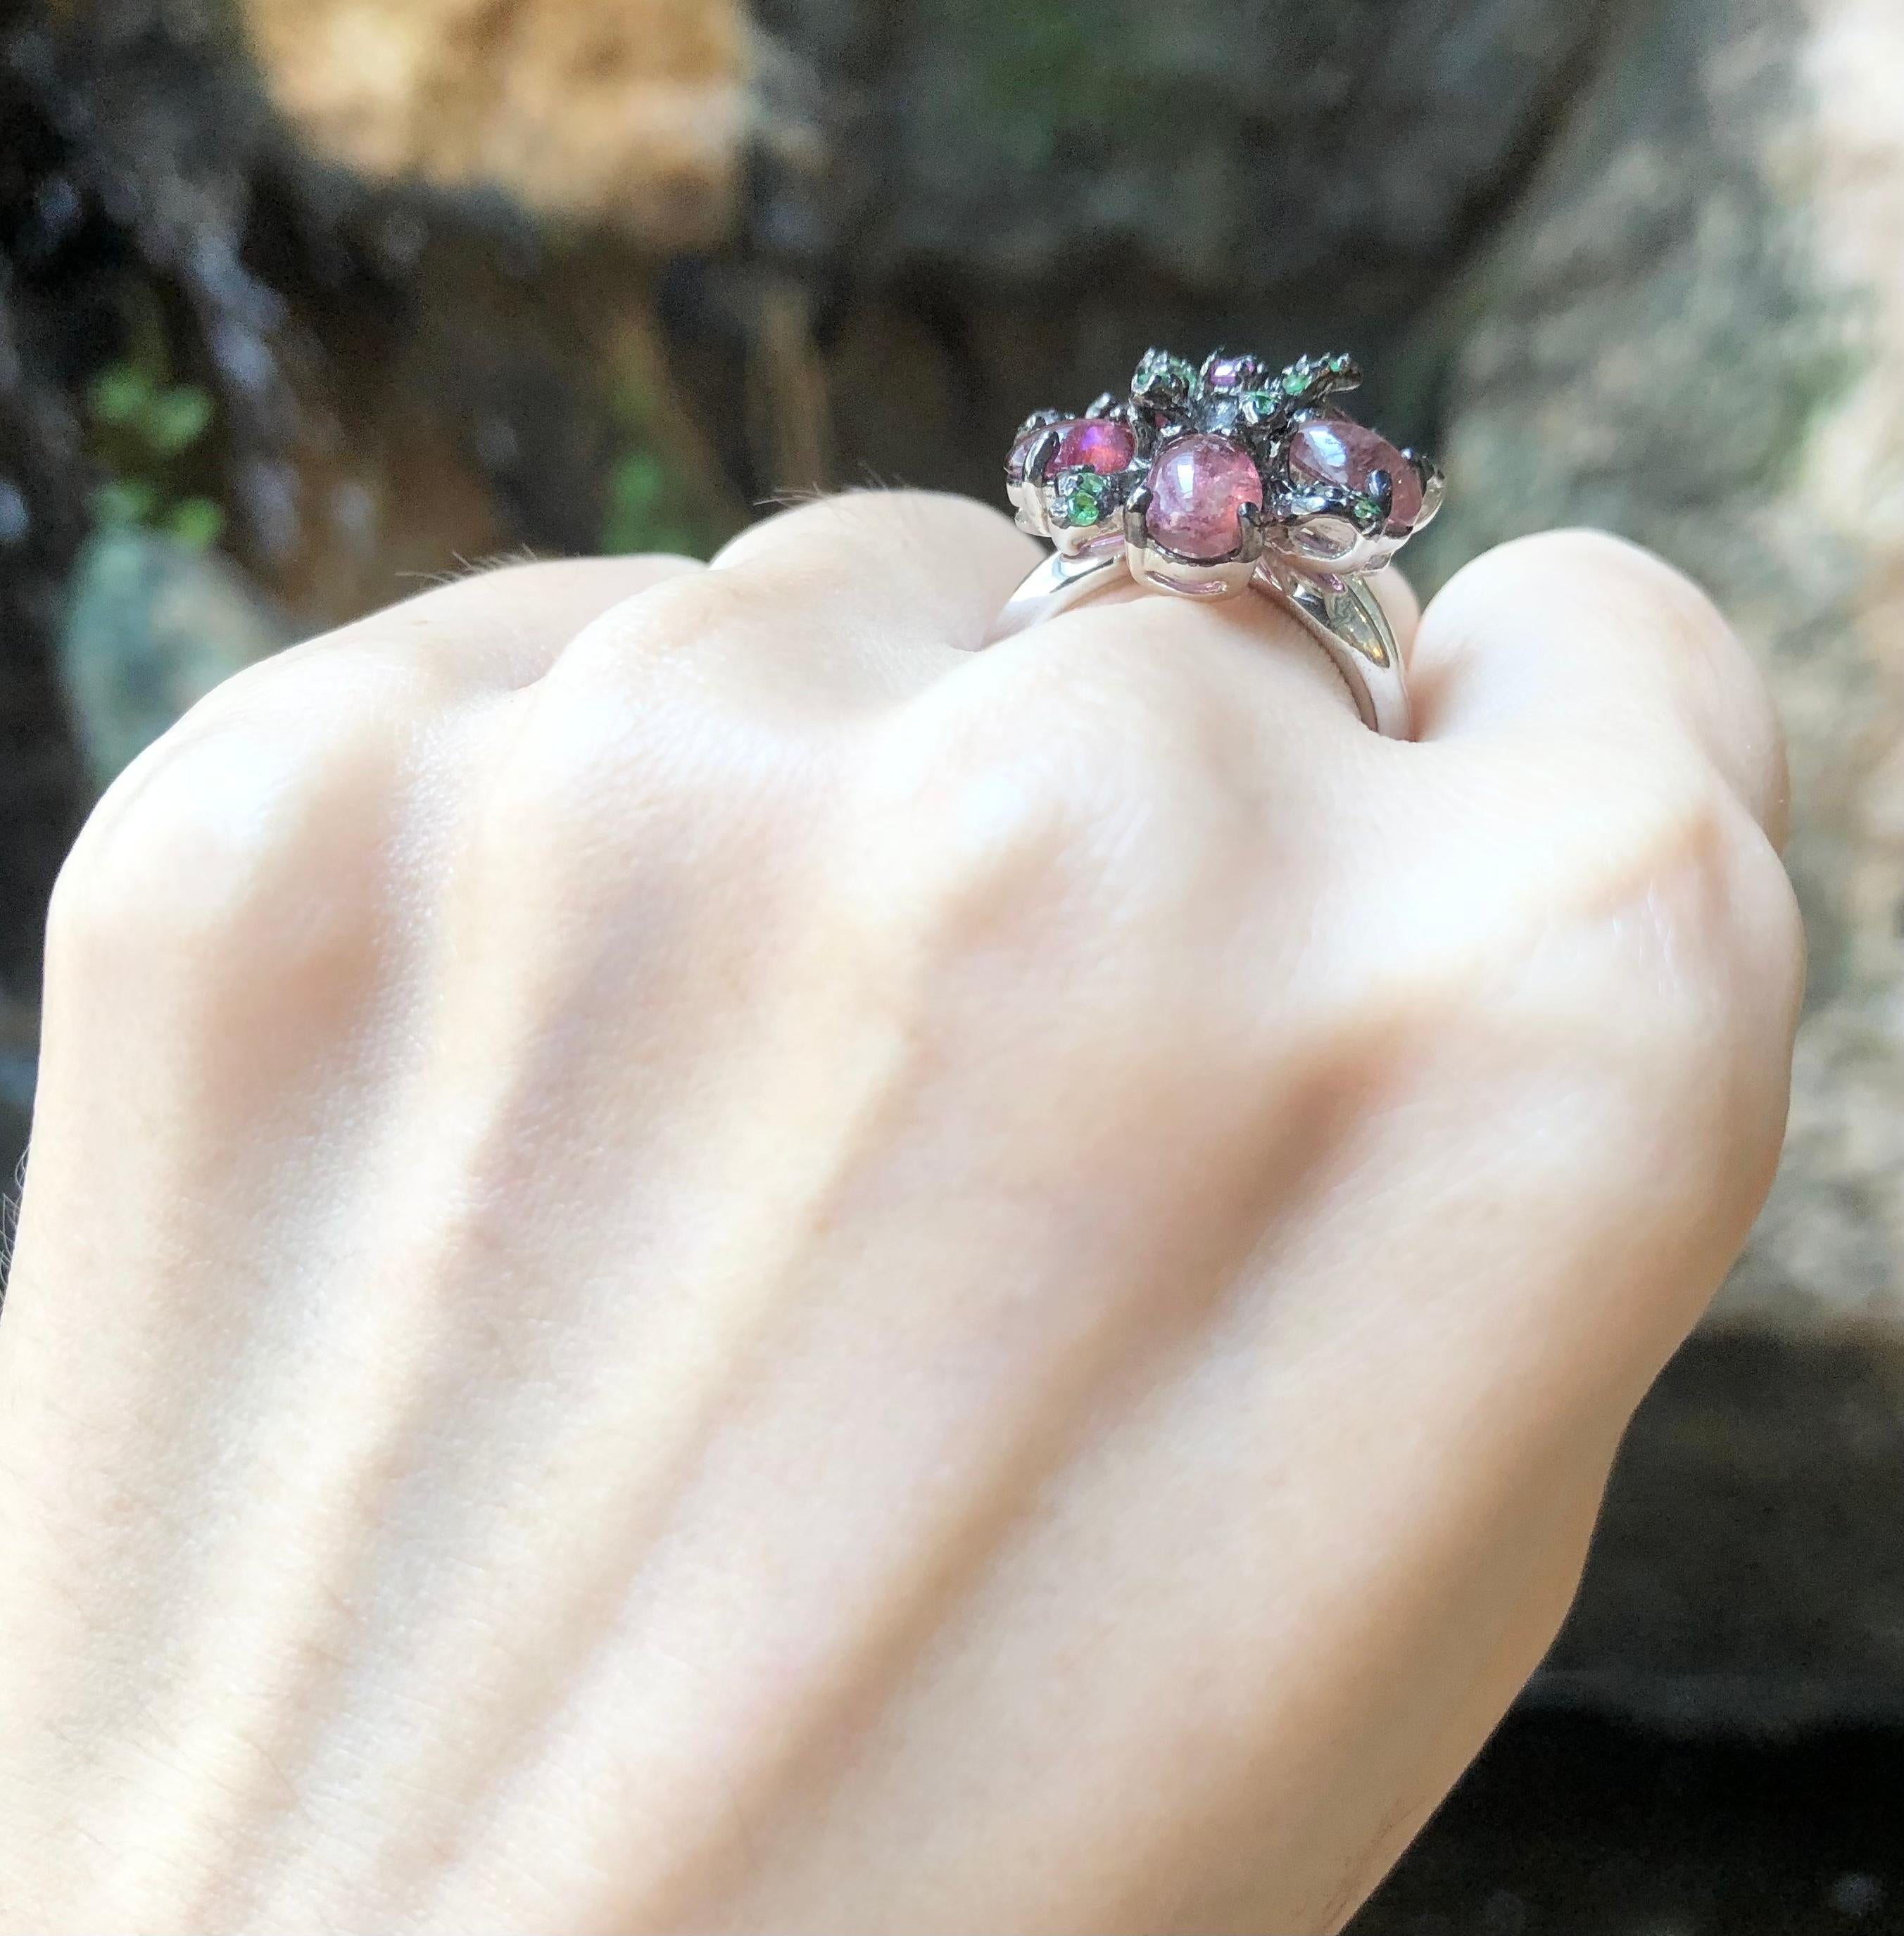 Tourmaline, Pink Sapphire and Tsavorite Ring set in Silver Settings

Width:  2.3 cm 
Length: 2.3 cm
Ring Size: 54
Total Weight: 8.52 grams

*Please note that the silver setting is plated with rhodium to promote shine and help prevent oxidation. 